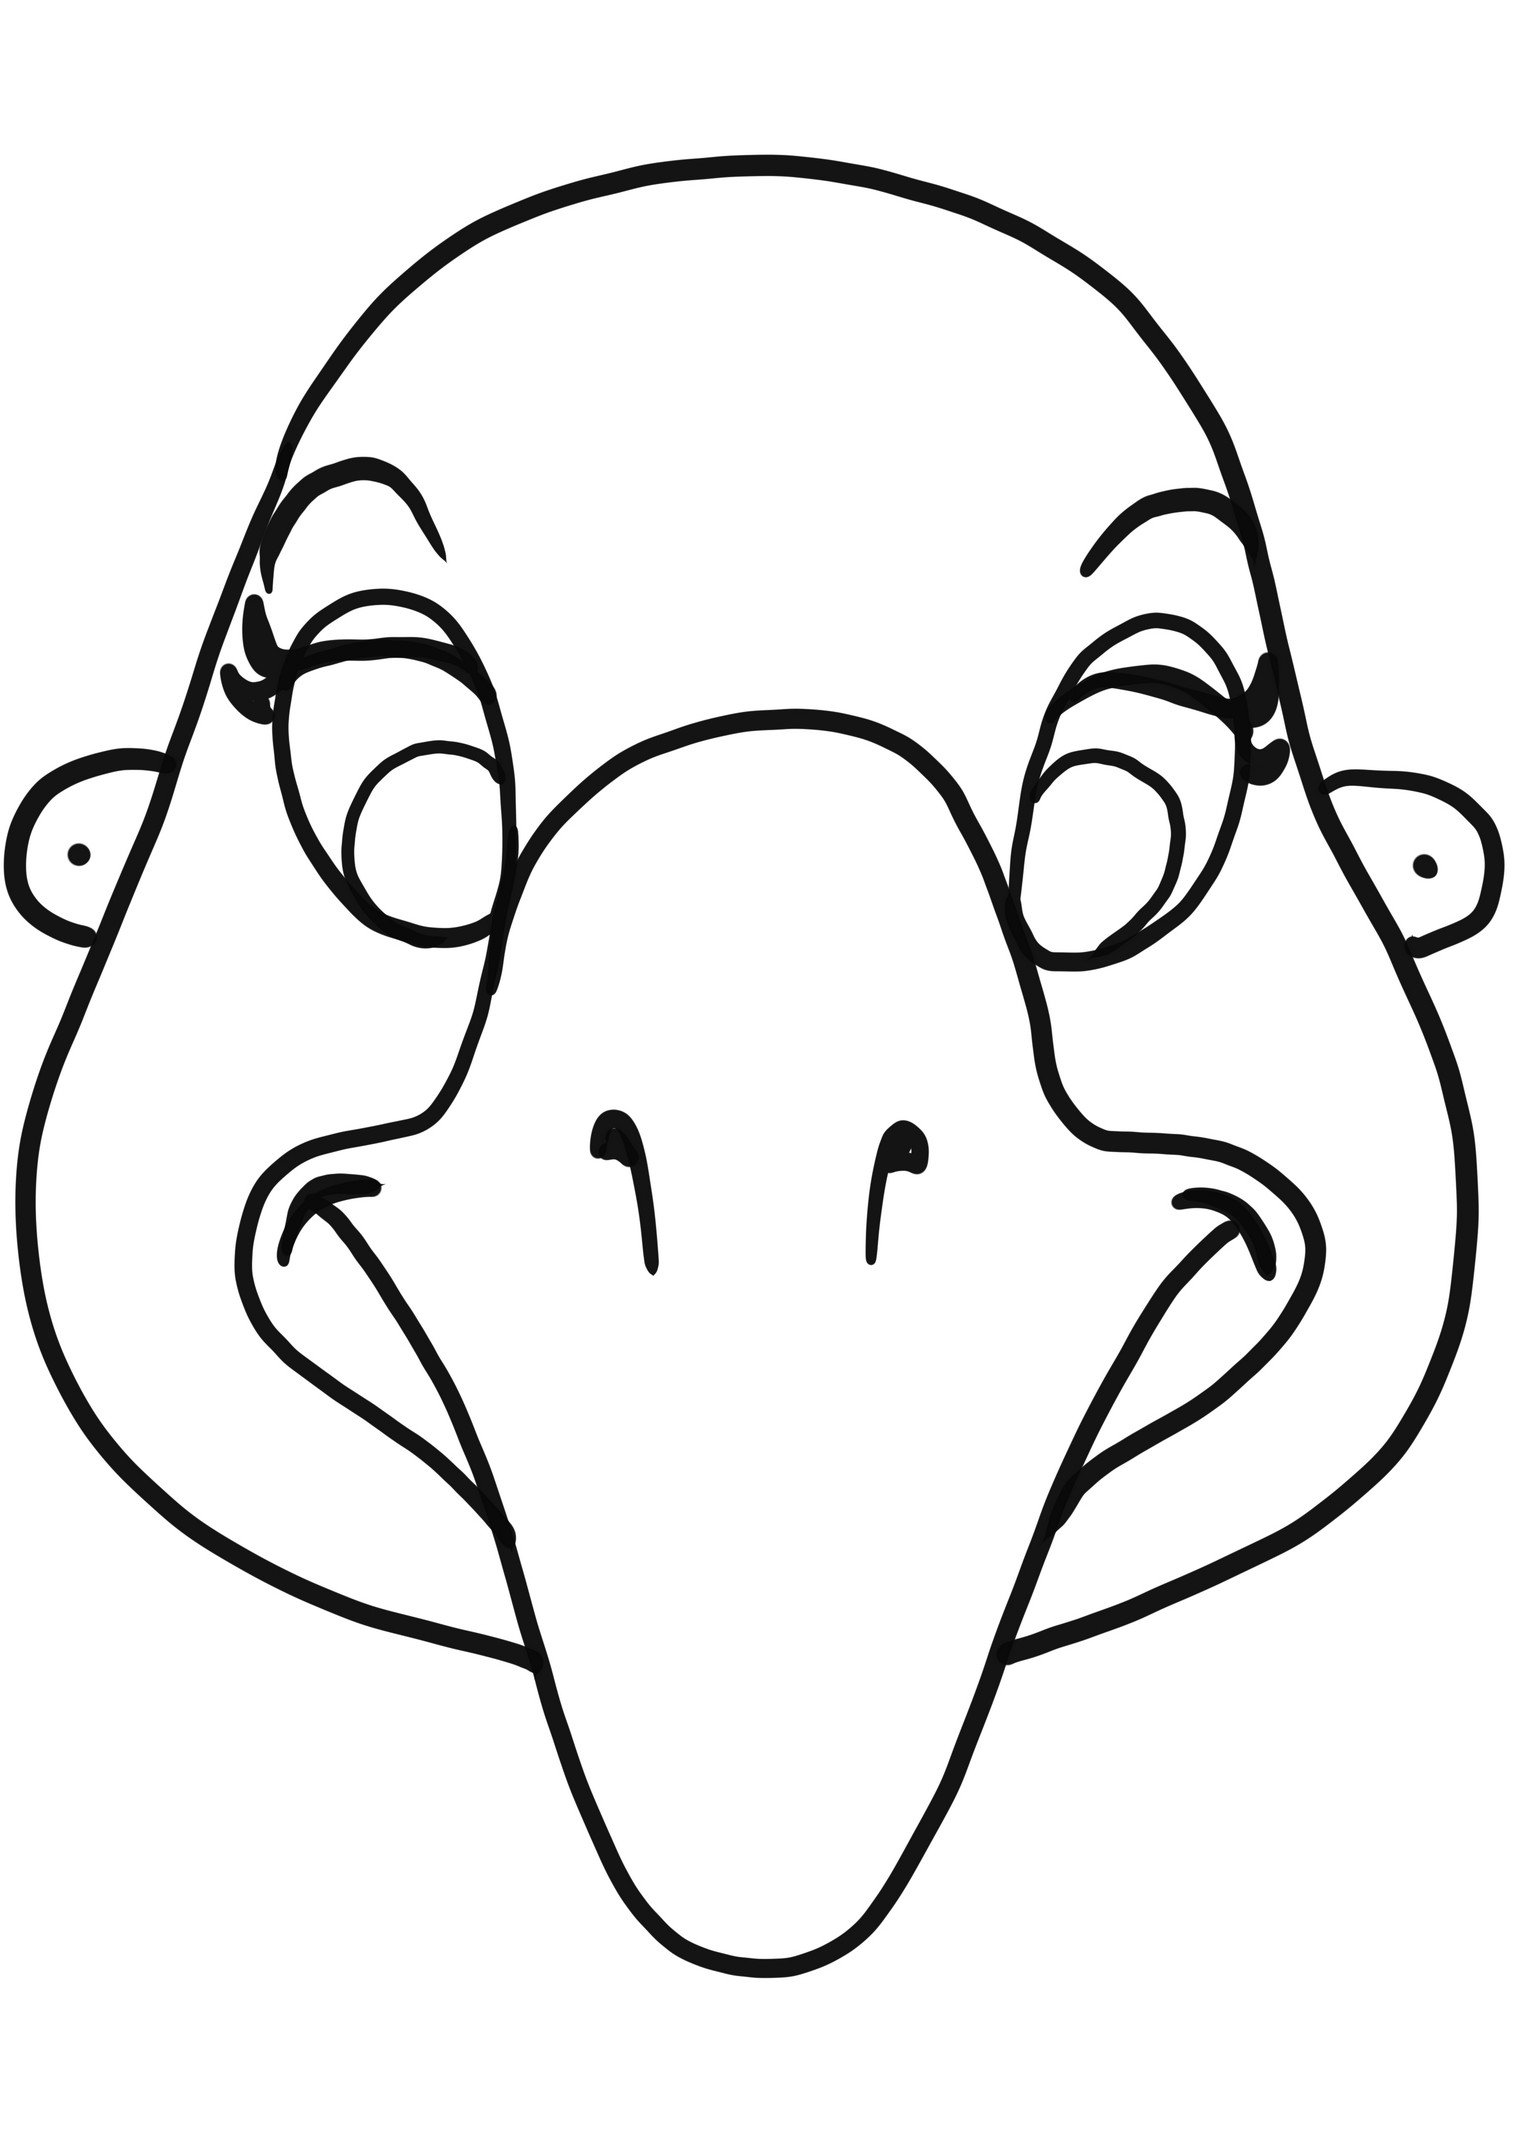 Goose mask coloring page to print and coloring